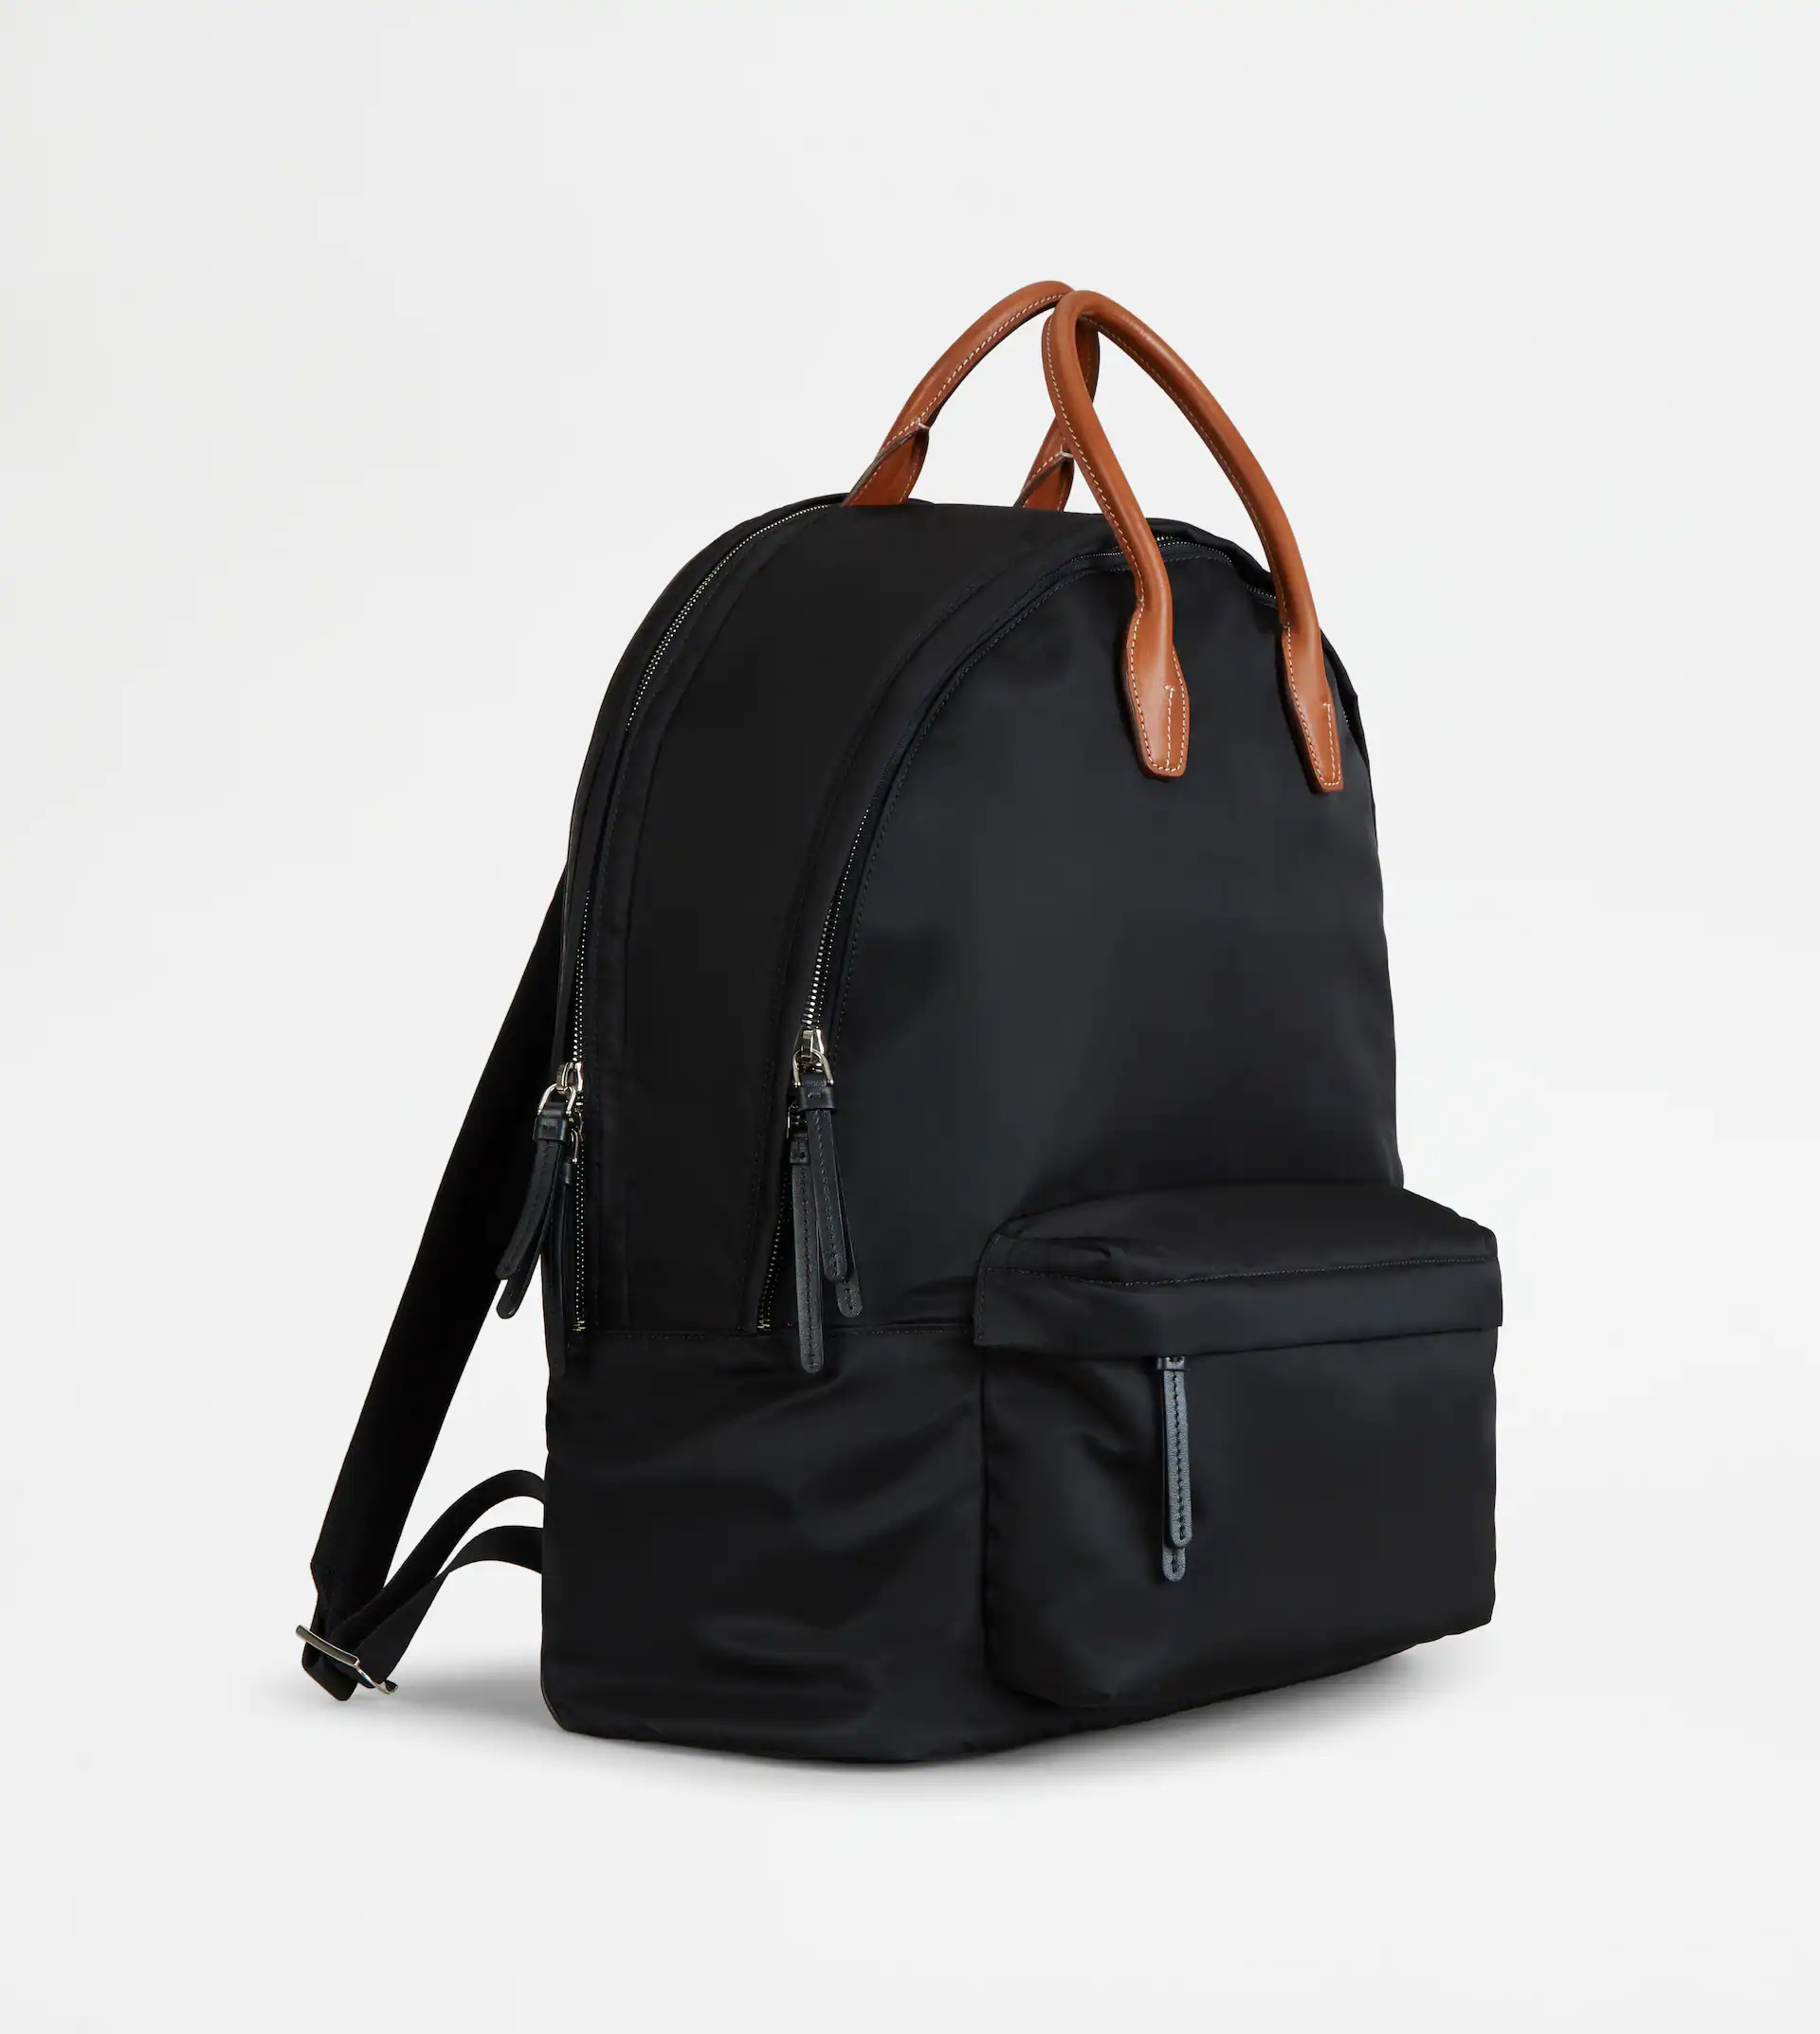 BACKPACK IN FABRIC AND LEATHER MEDIUM - BLACK - 2